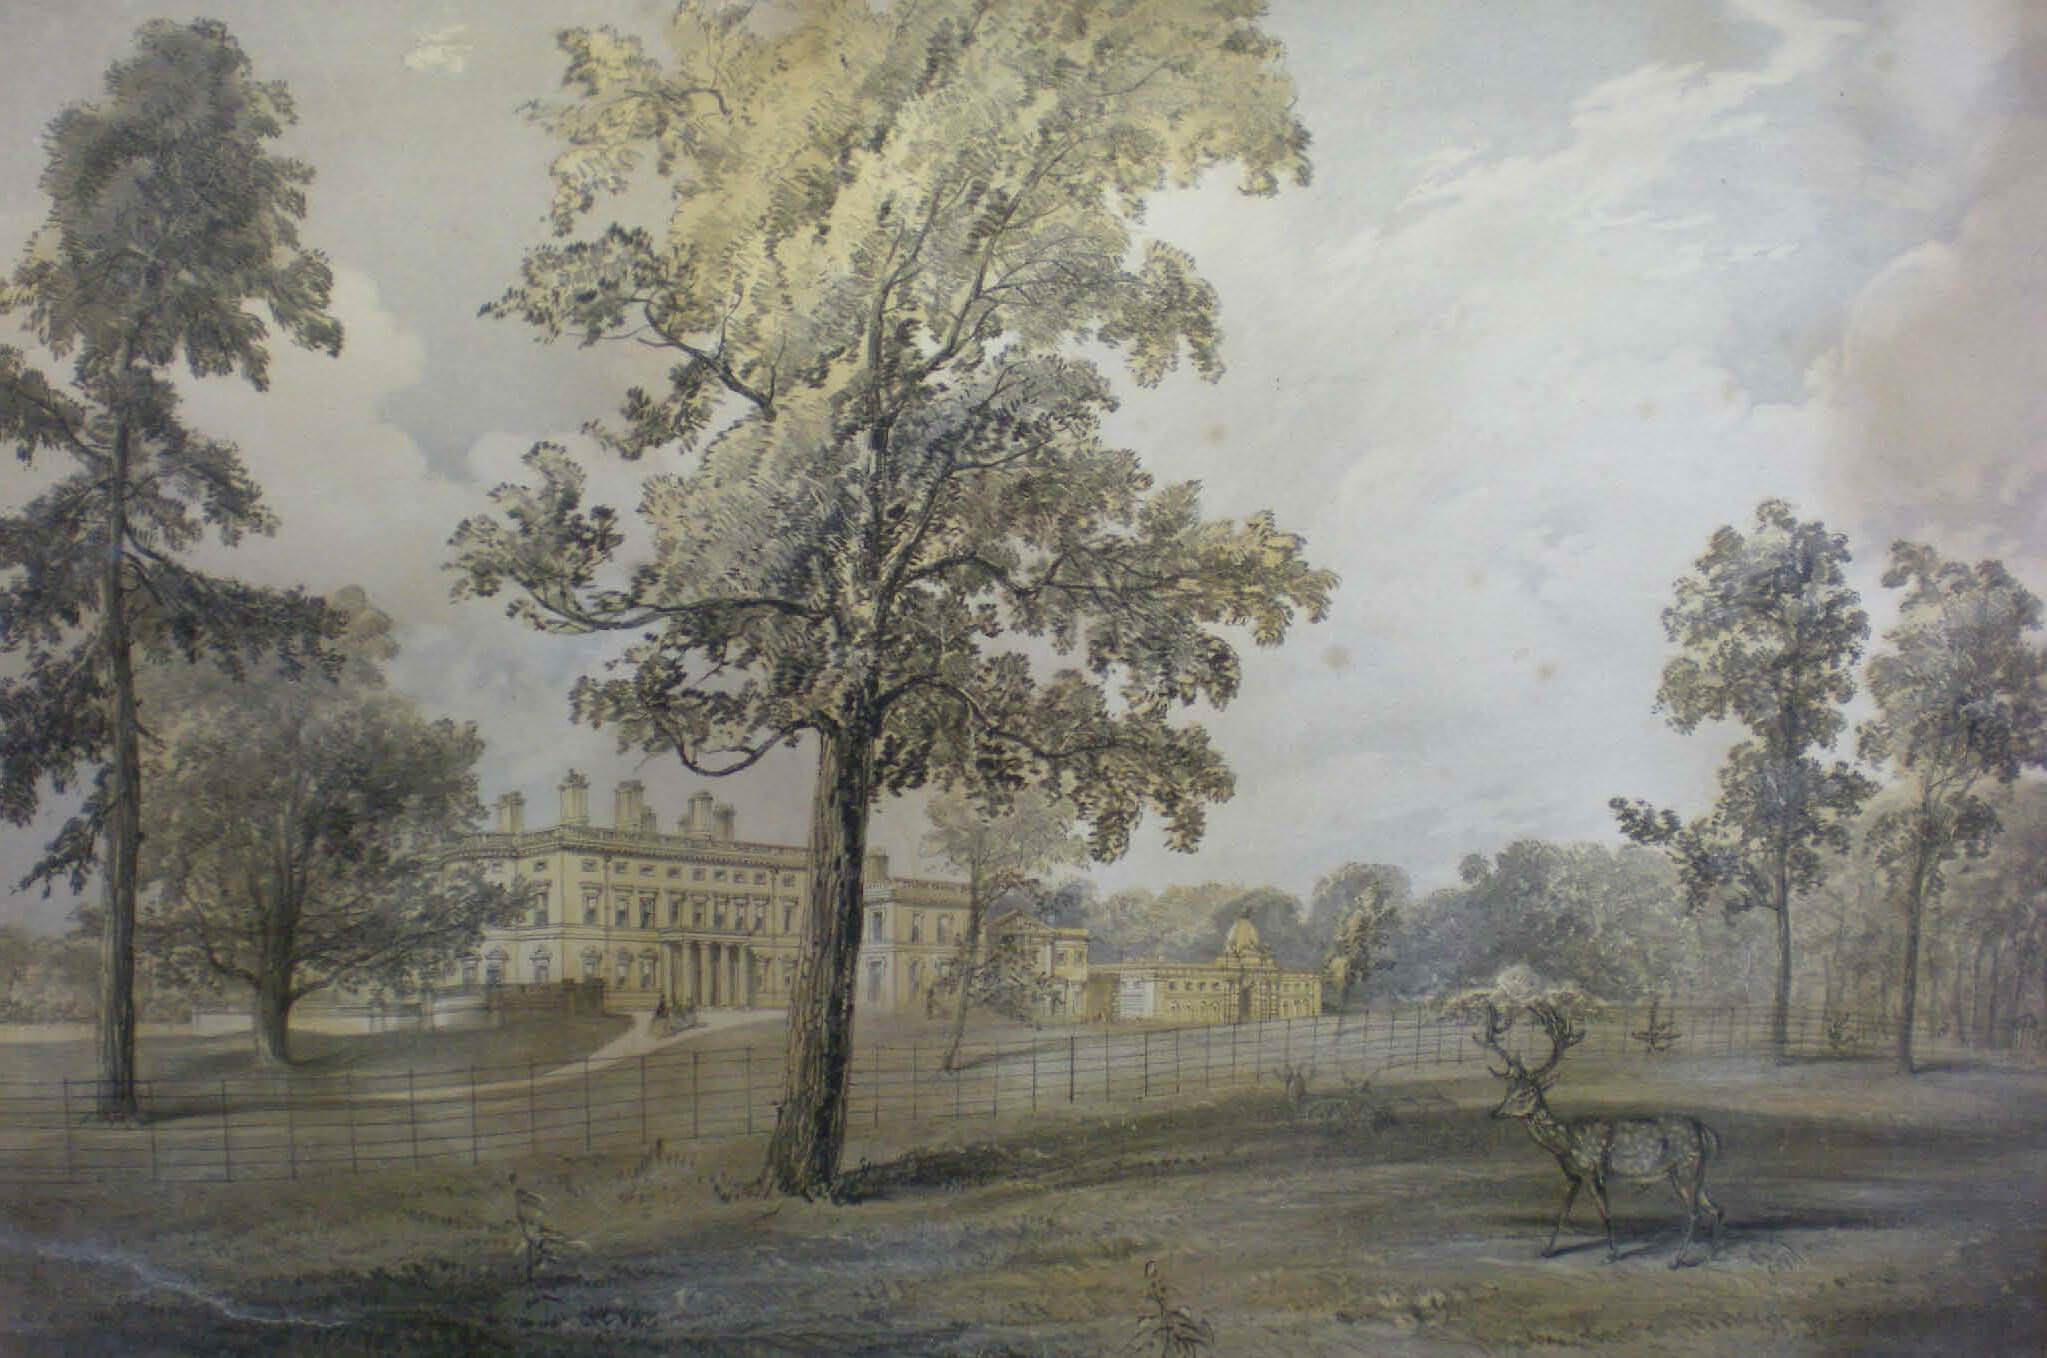 Landscape painting of historic hall surrounded by trees.